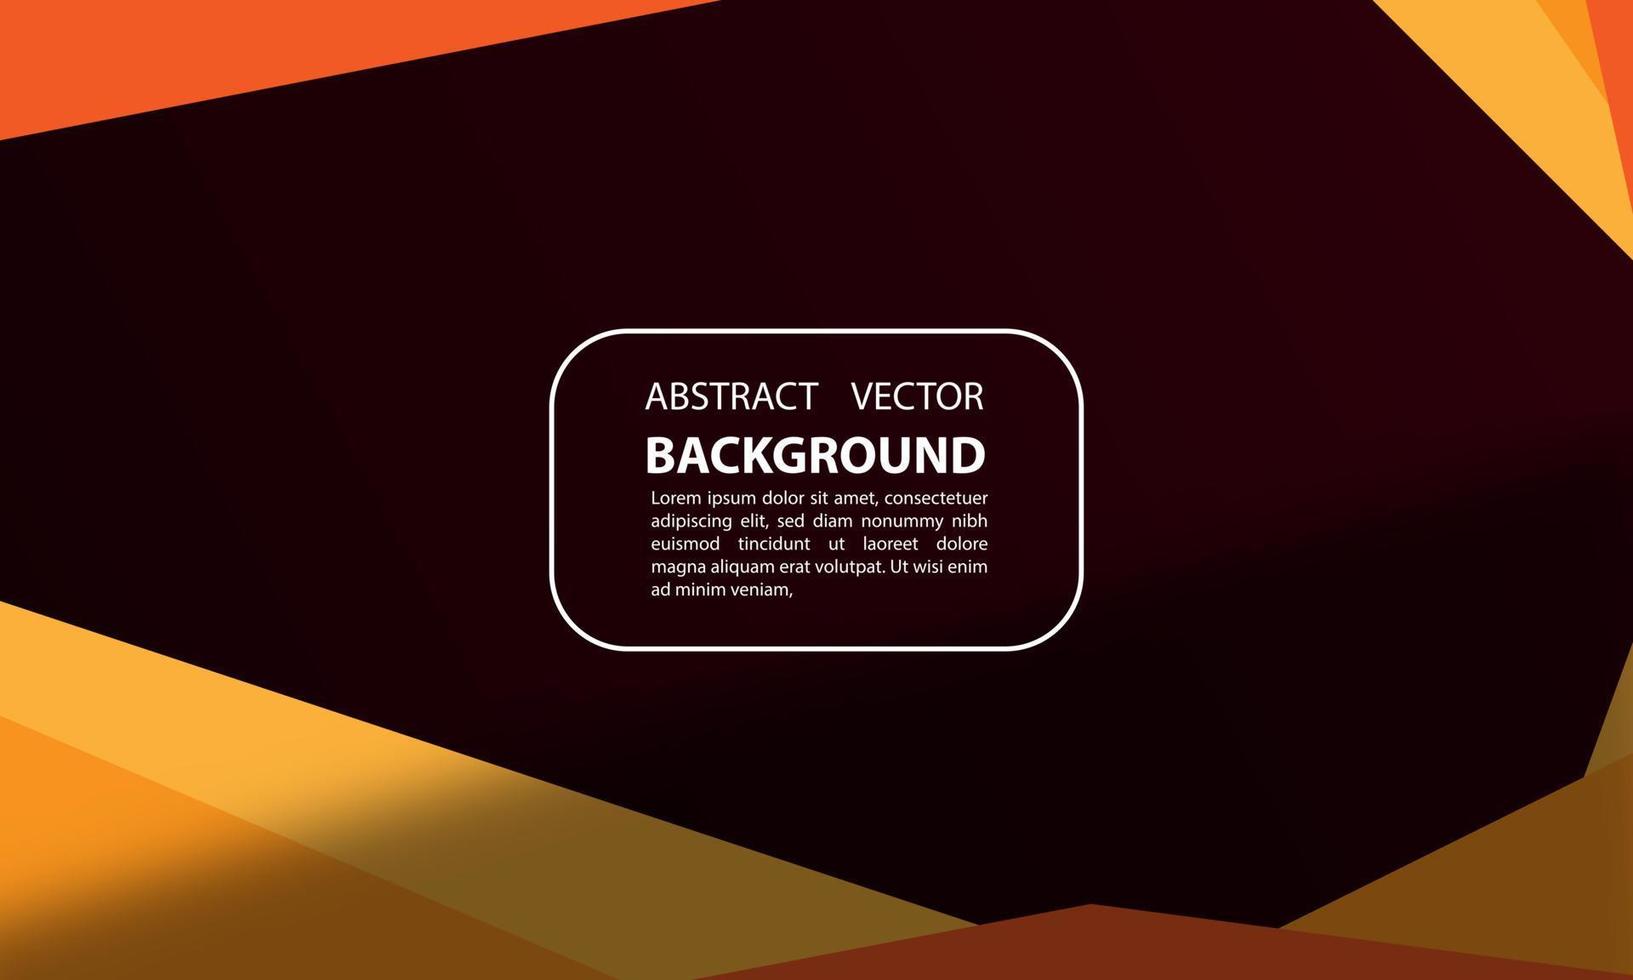 abstract background geometric gradient color maroon orange shadow overlay trendy modern futuristic, for posters, banners, vector design eps 10